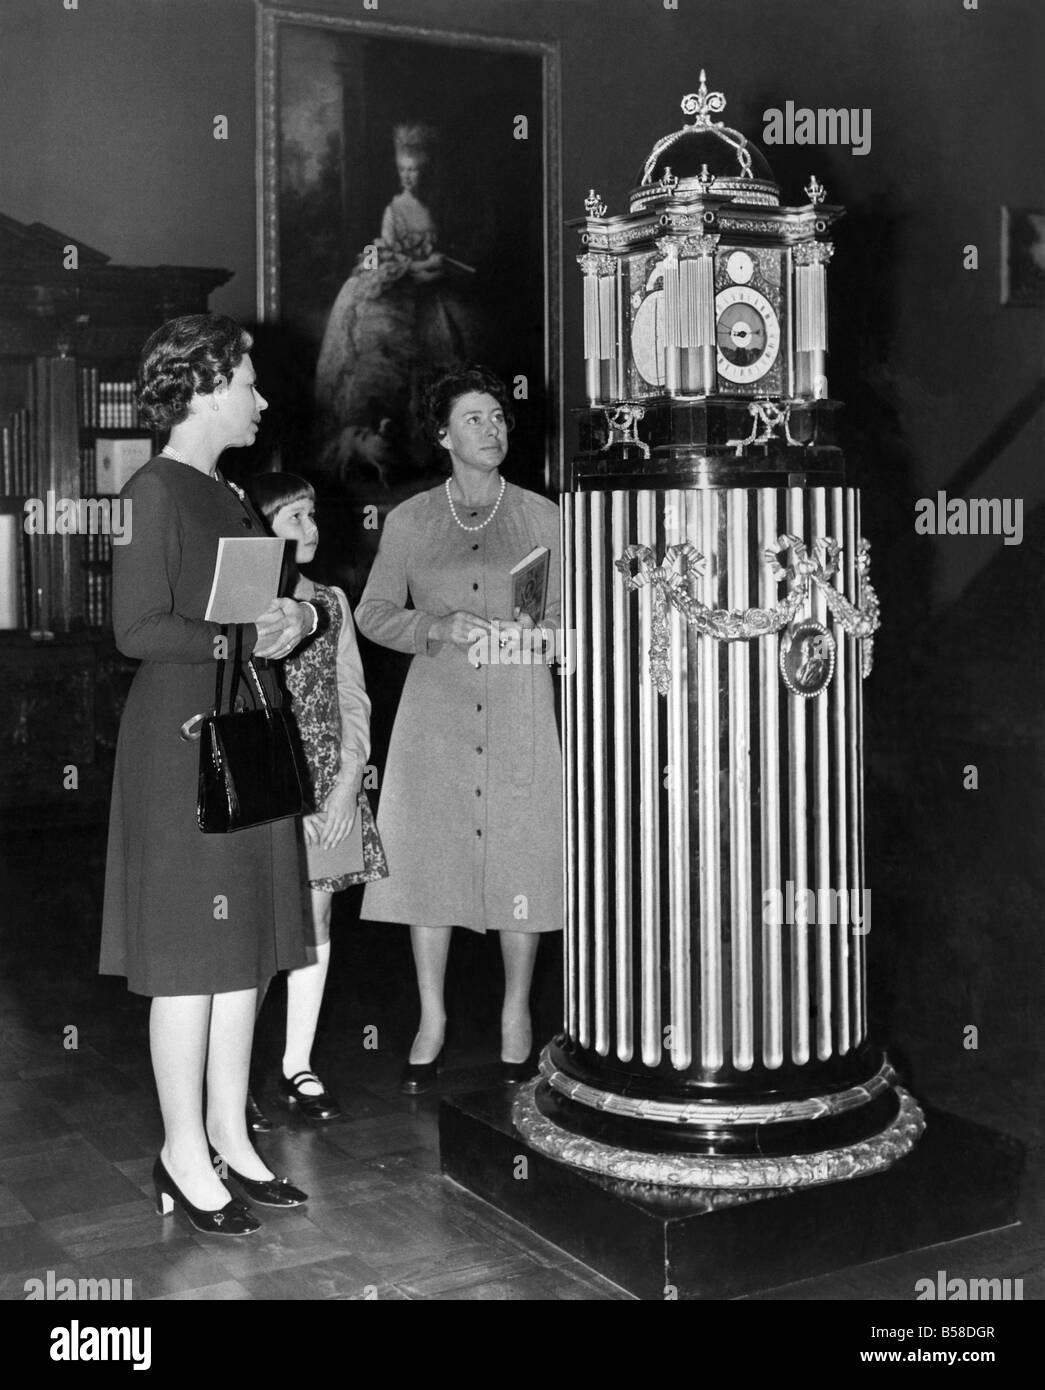 H.M. The Queen H.R.H. Princess Margaret, and Lady Sarah Armstrong Jones looking at a four faced Astronomical clock, made in 1768 by Christopher Pinchbeck for King George III. The clock case was designed by Sir William Chambers, assisted by the king. Picture at rear is Gainsborough of queen Caroline. November 1974 P006317 Stock Photo